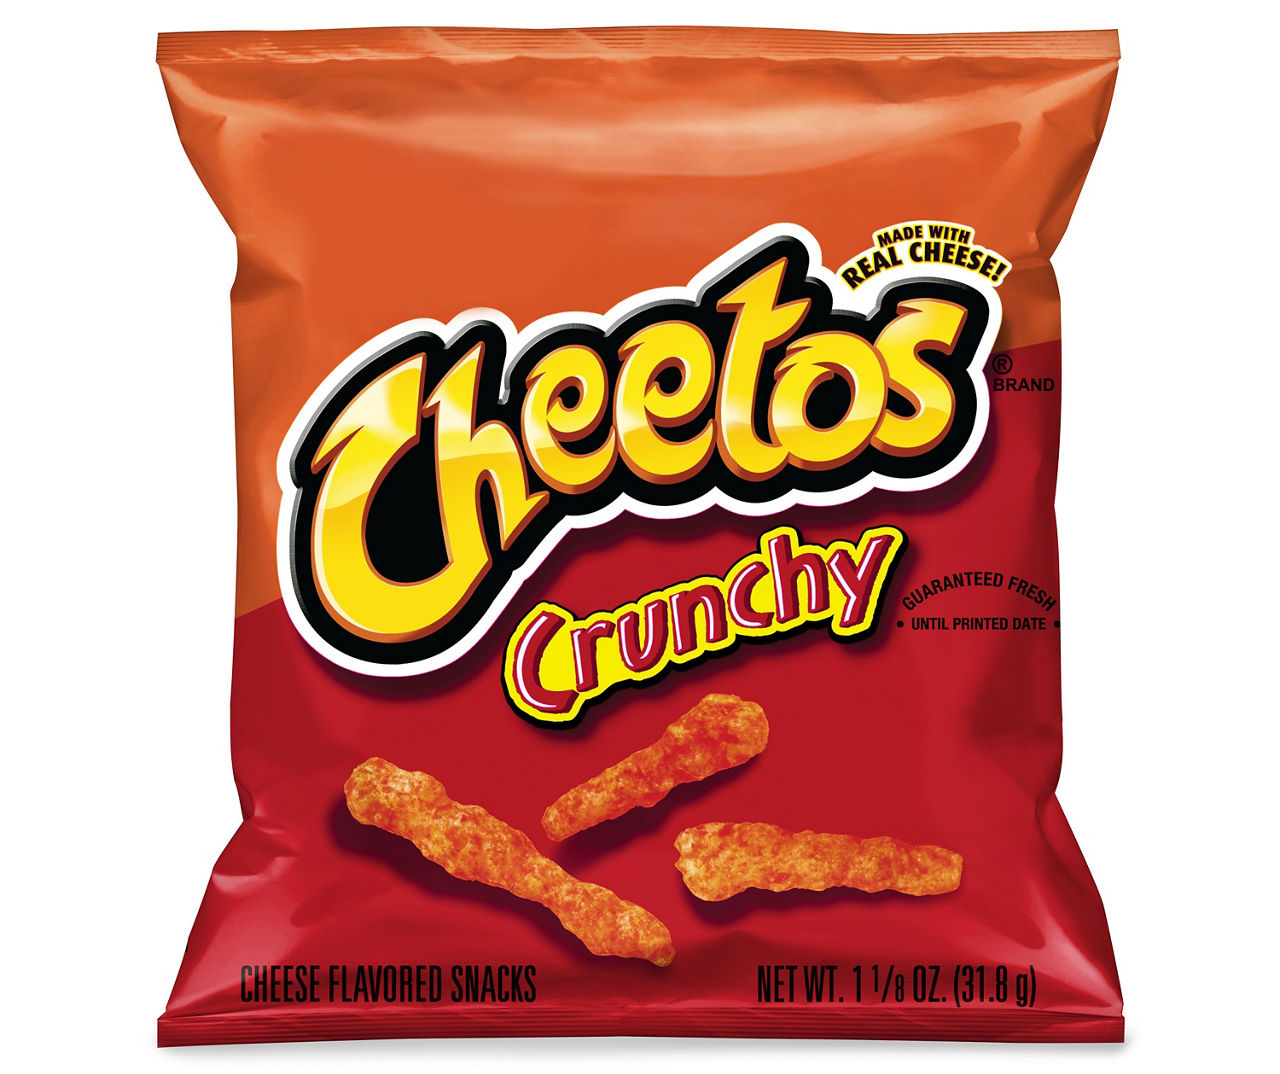 Just This The crunchy cheese